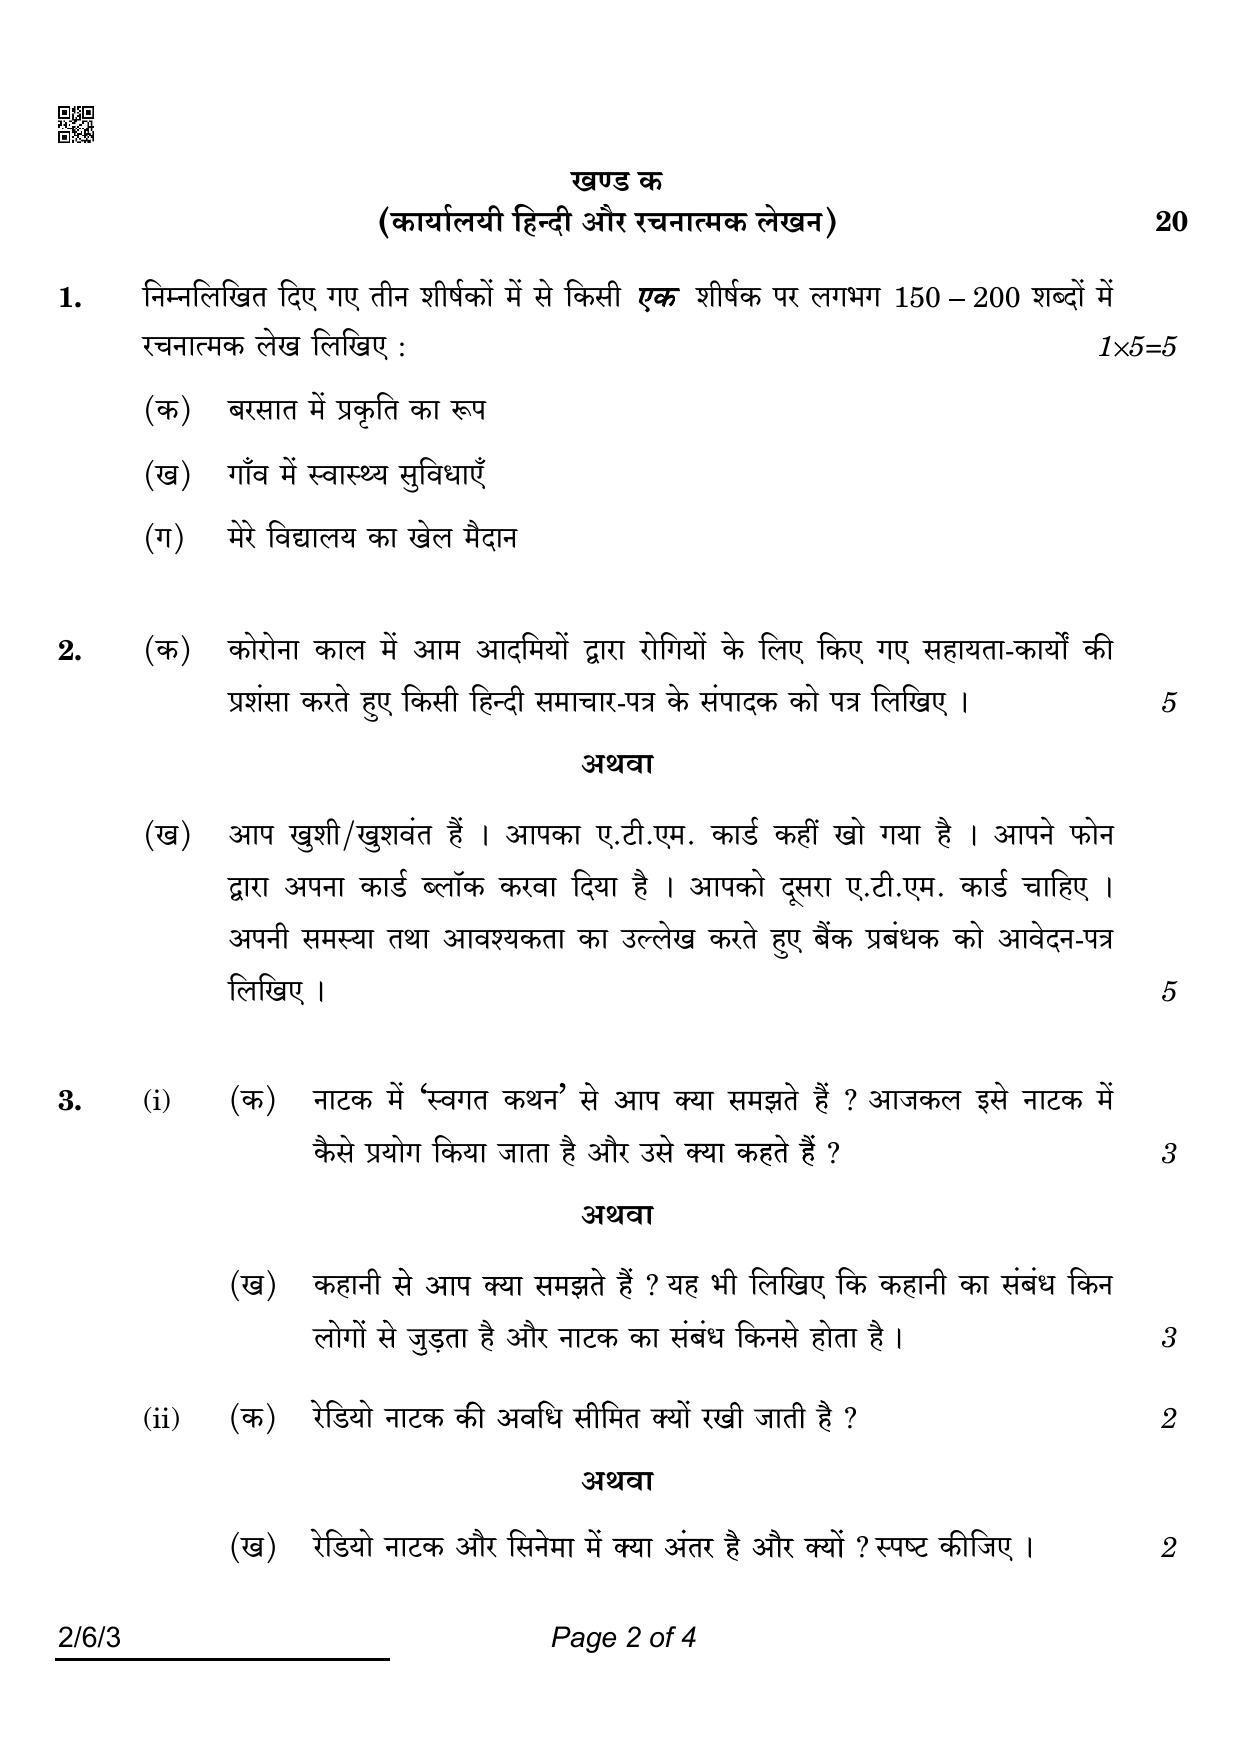 CBSE Class 12 2-6-3 Hindi Core 2022 Compartment Question Paper - Page 2